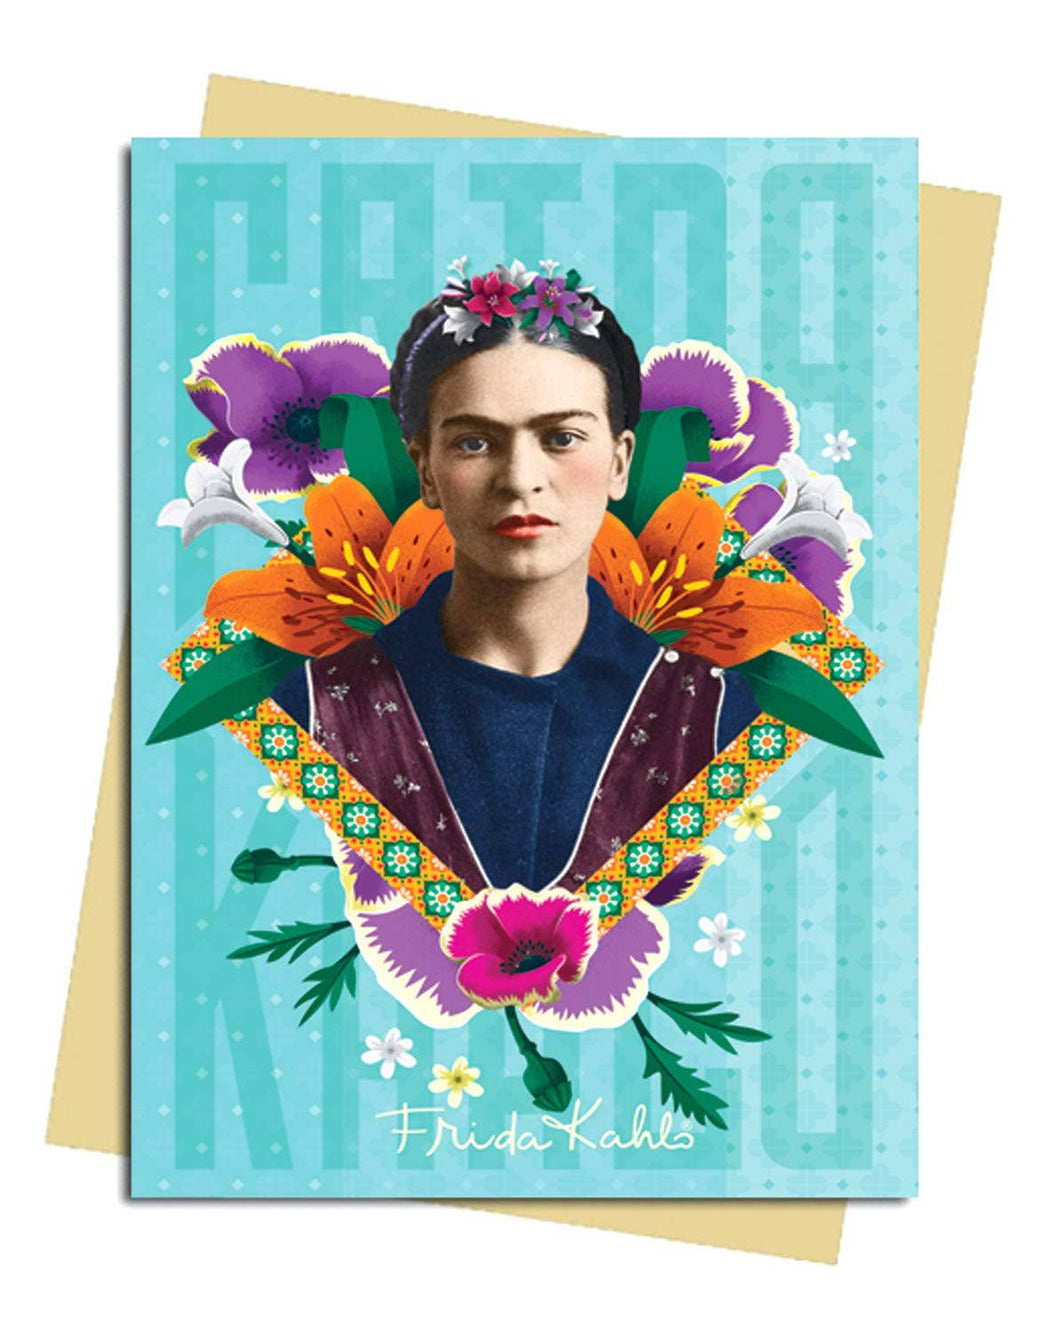 Microcosm Publishing & Distribution - Frida Kahlo Greeting Cards (Pack of 6)